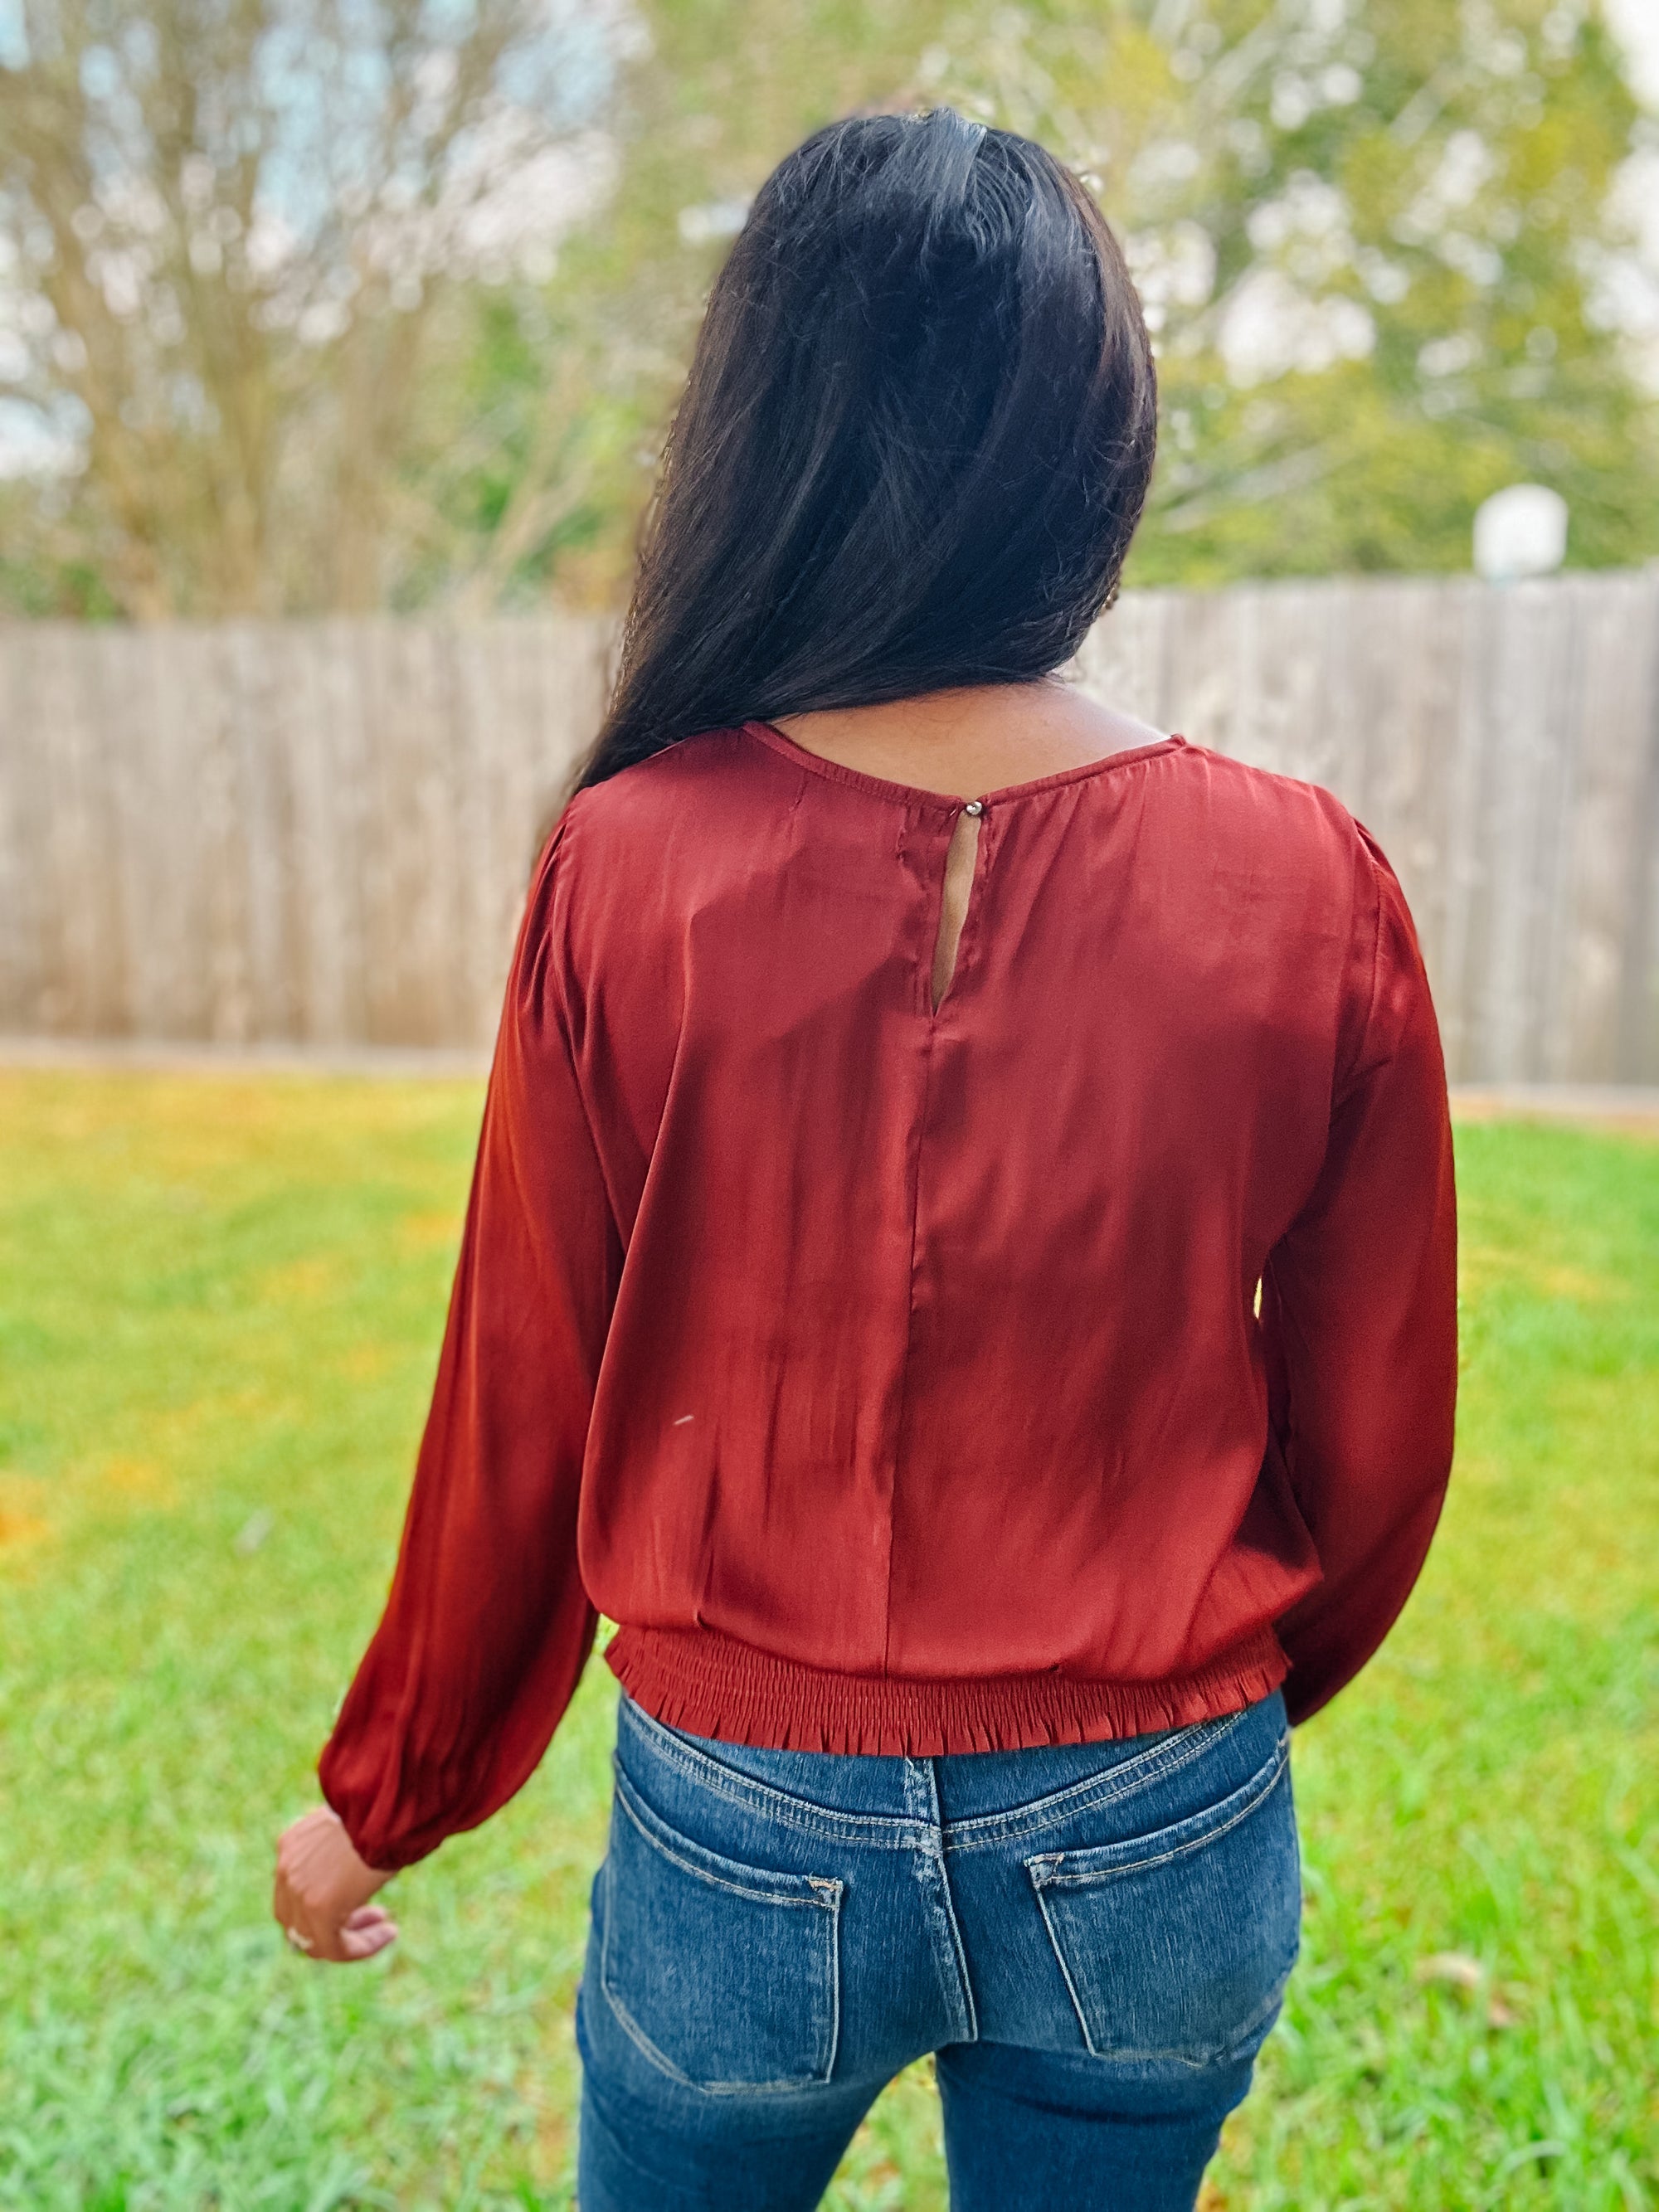 The Fall Bliss Top